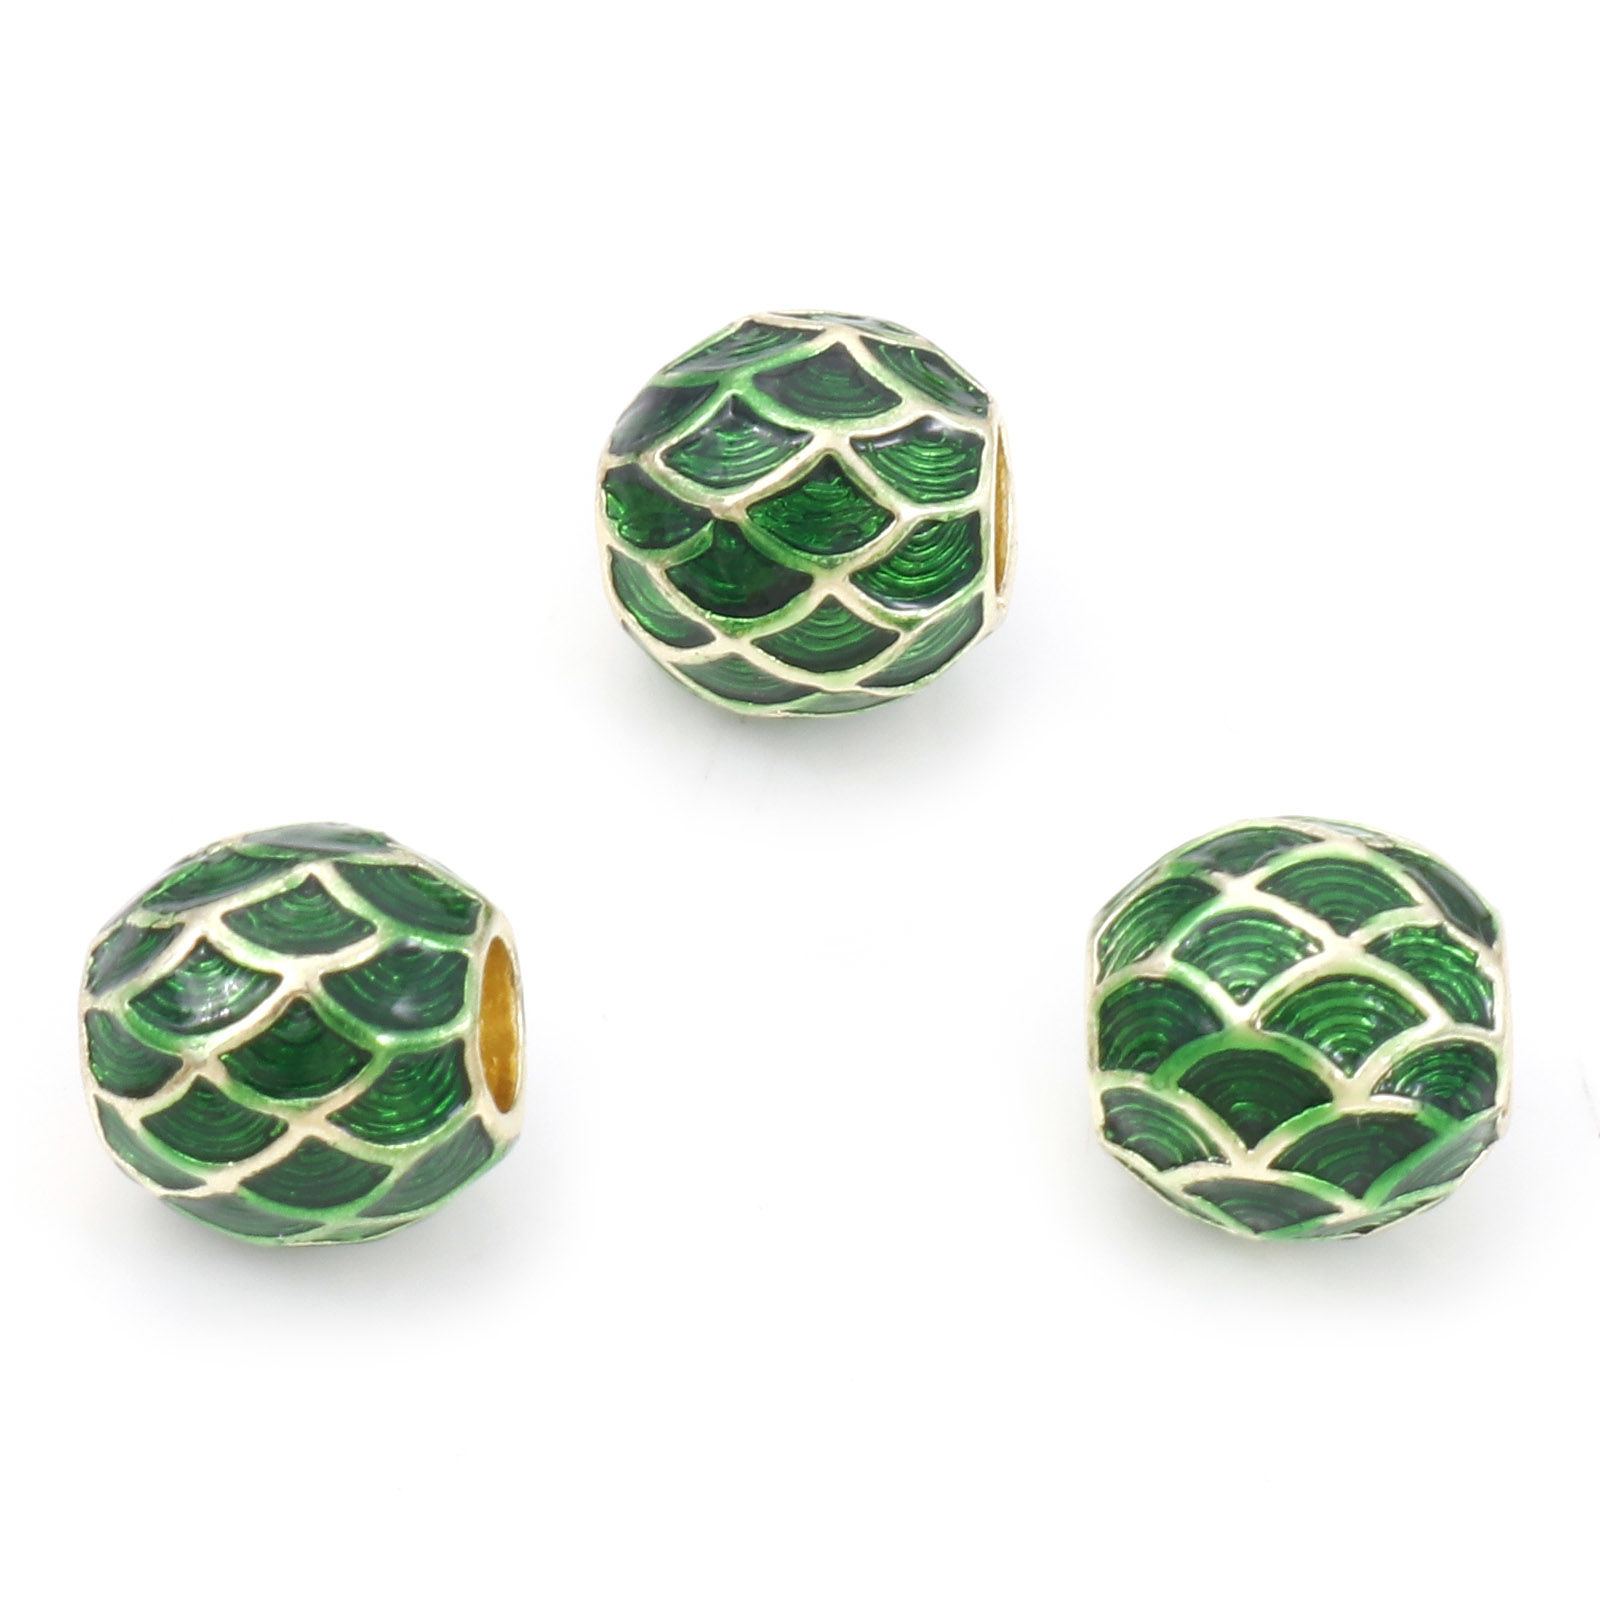 Picture of Zinc Based Alloy European Style Large Hole Charm Beads Gold Plated Barrel Fish Scale Enamel 10mm x 10mm, Hole: Approx 4mm, 5 PCs